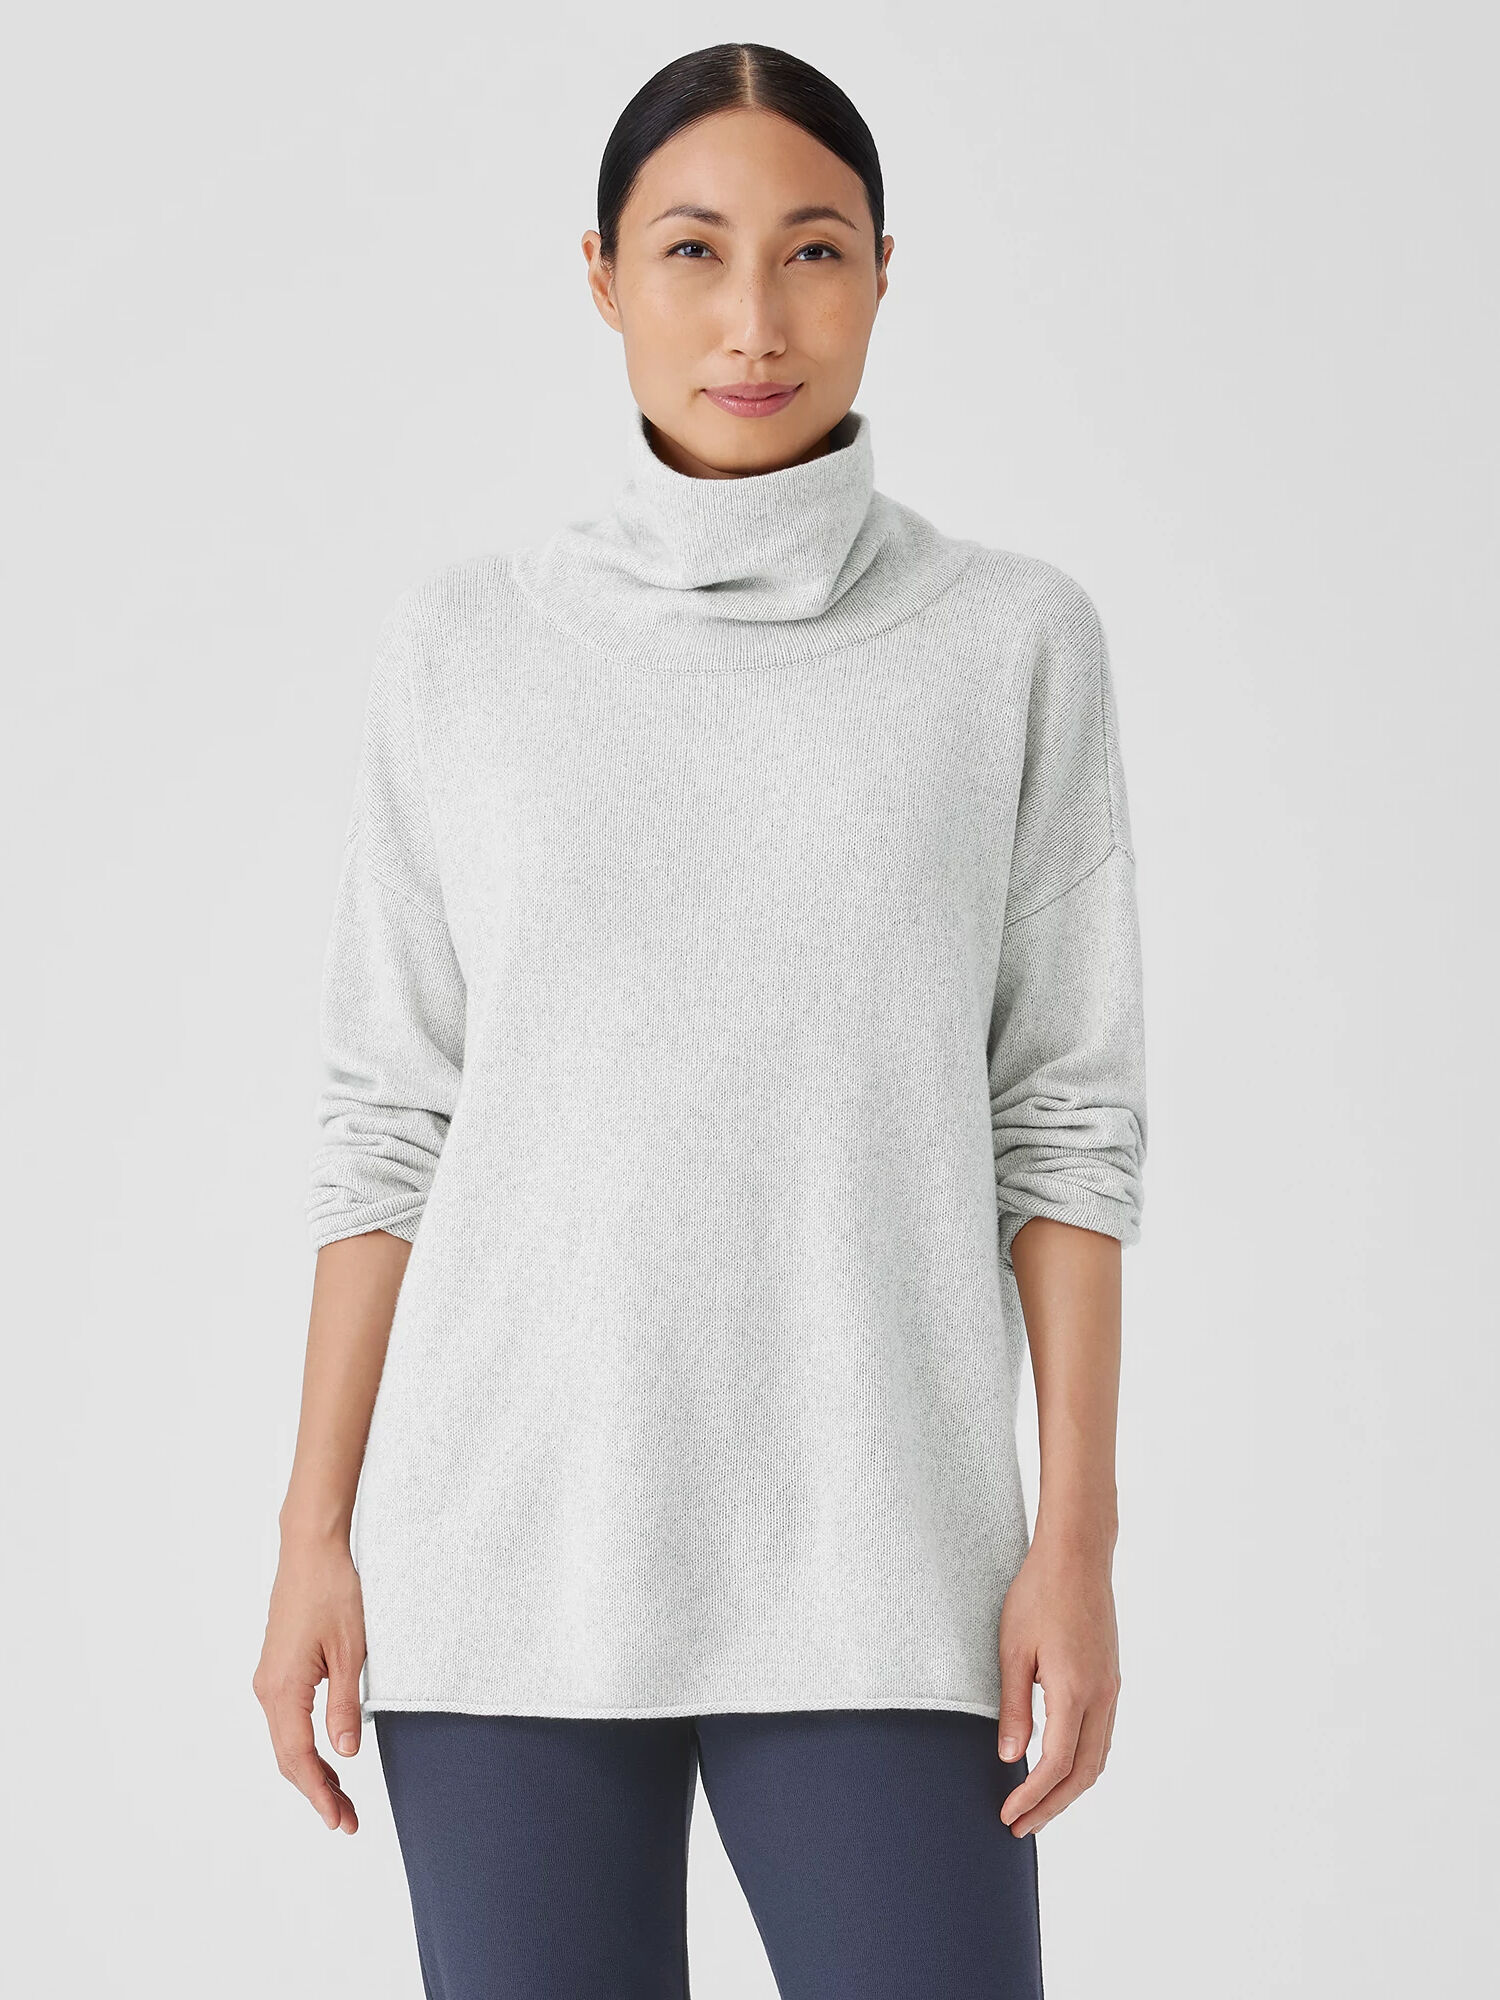 EILEEN FISHER Cotton and Recycled Cashmere Turtleneck Long Top  SEA Salt  female  size:Petite Large